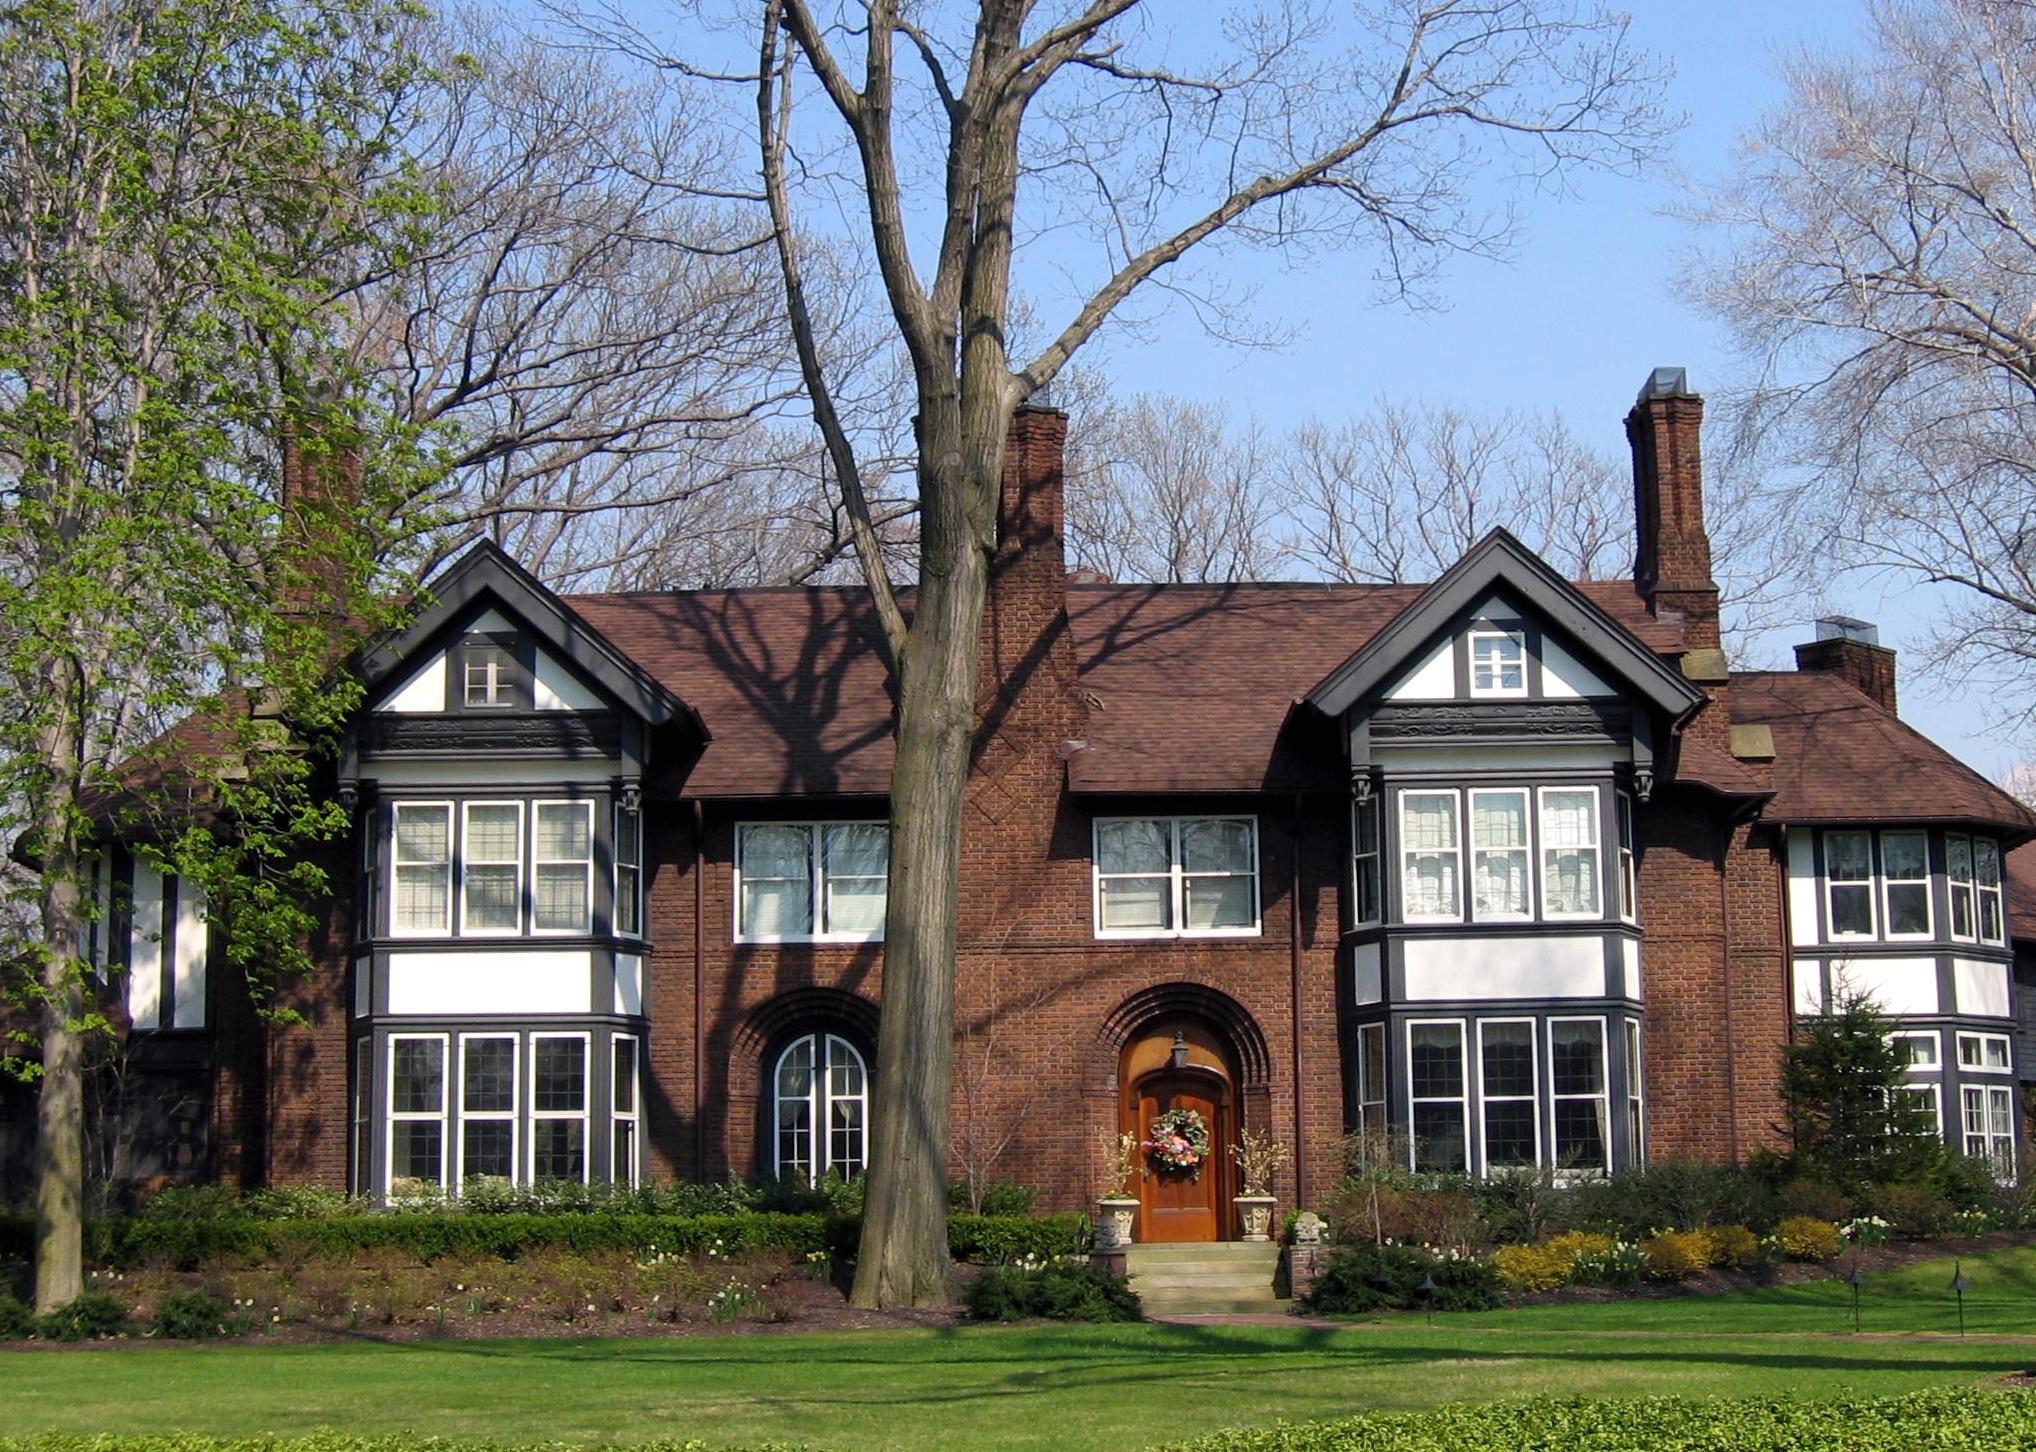 <p>- Population: 29,197<br> - Location: Suburb of Cleveland, OH<br> - National rank: 68</p>  <p>Shaker Heights is best-known for being one of the first planned communities in the United States, as well as its <a href="https://shakerite.com/campus-and-city/the-true-story-of-the-integration-of-shaker-heights/24/2021/">commitment to integration</a> as the city grew. You might recognize the town from the popular novel and limited series "Little Fires Everywhere."</p>